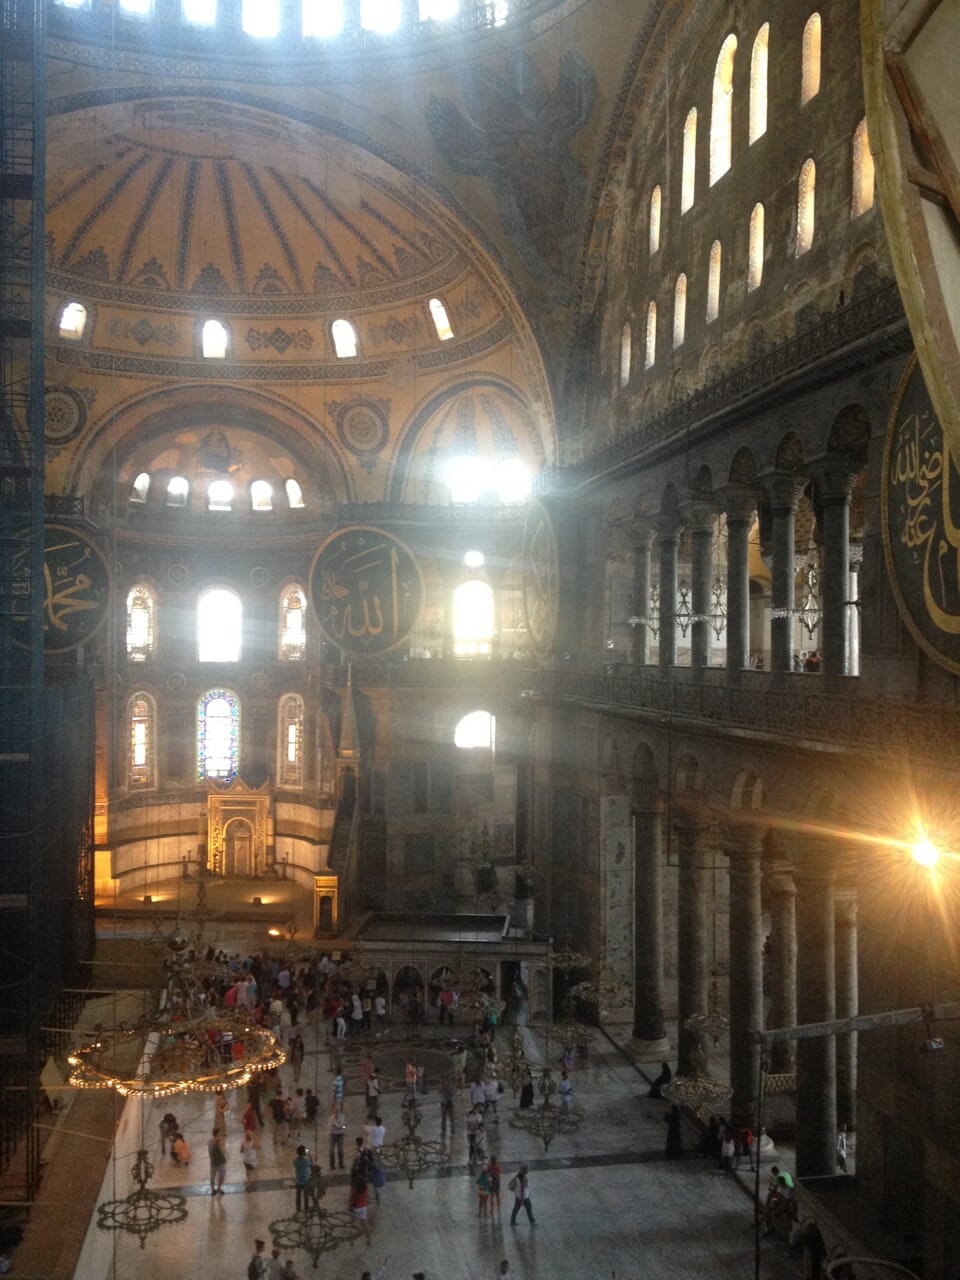 The view of the interior of Hagia Sophia, Ifrom the second floor, stanbul.